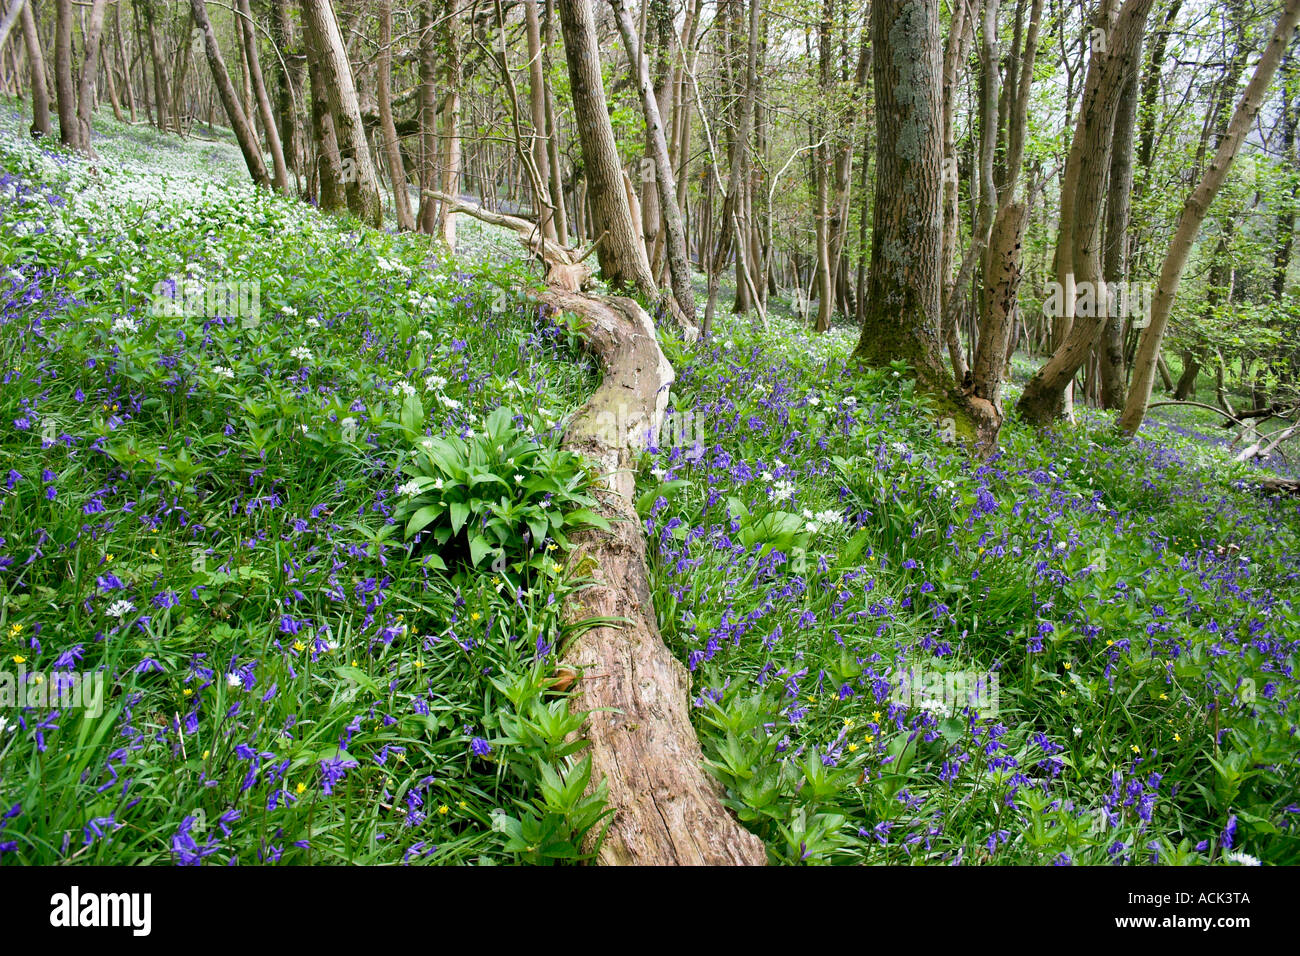 Log in Wooded Forest of Allium White Wild Garlic and Bluebells and trees Tyneham Village Dorset Stock Photo